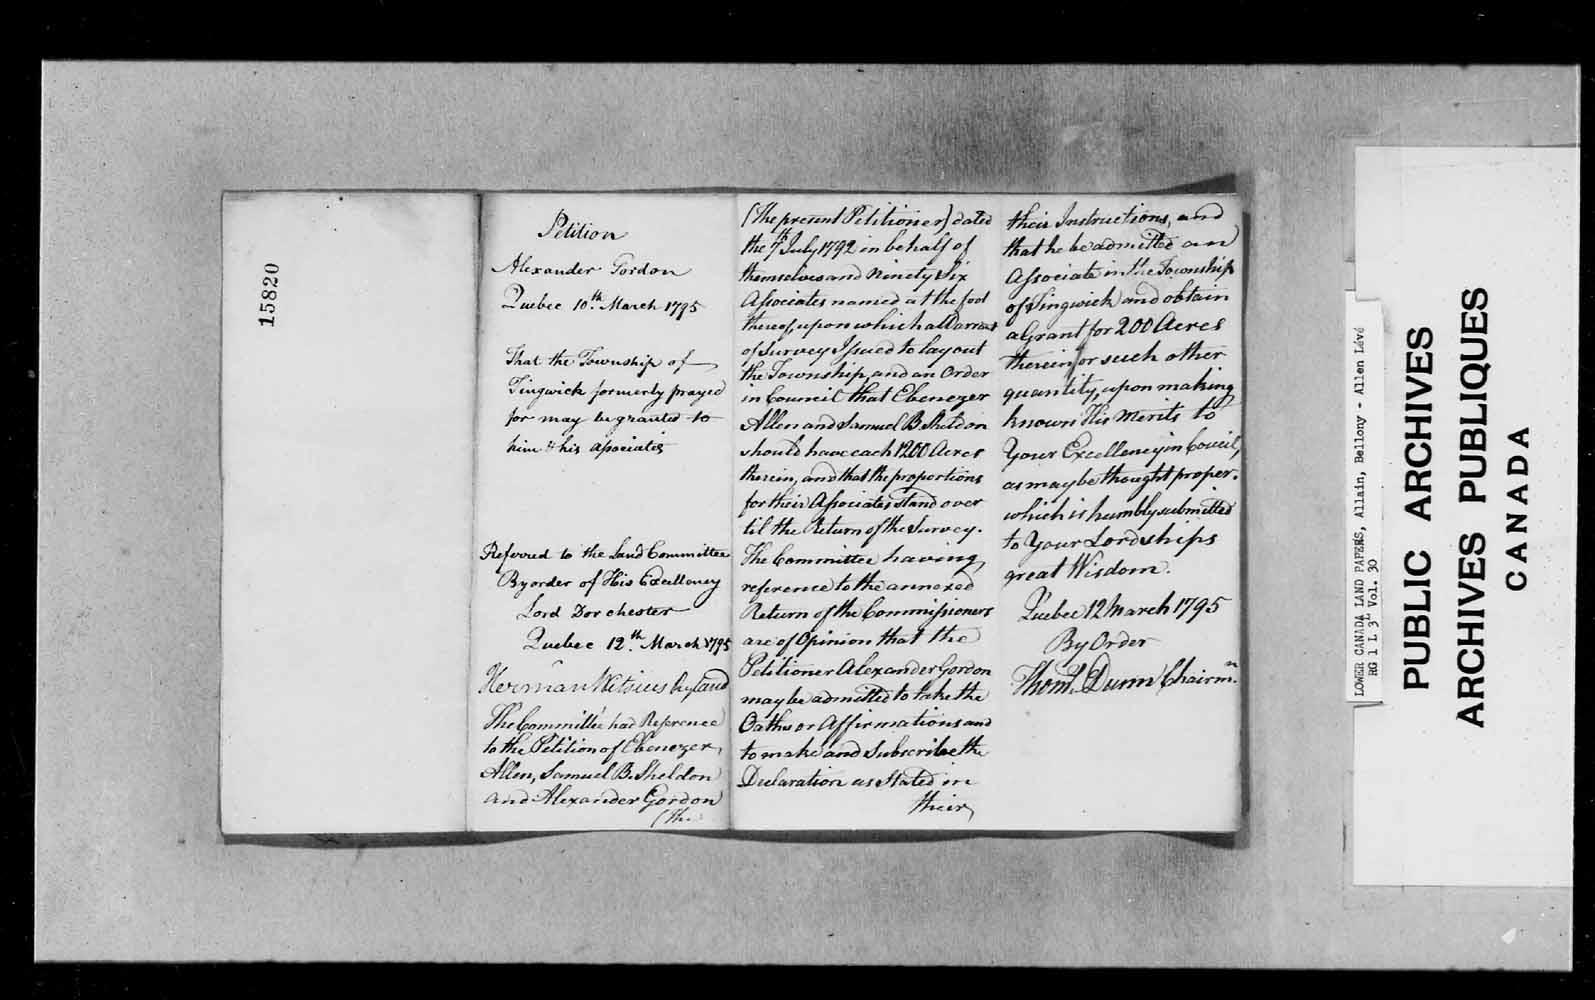 Digitized page of  for Image No.: e003702650